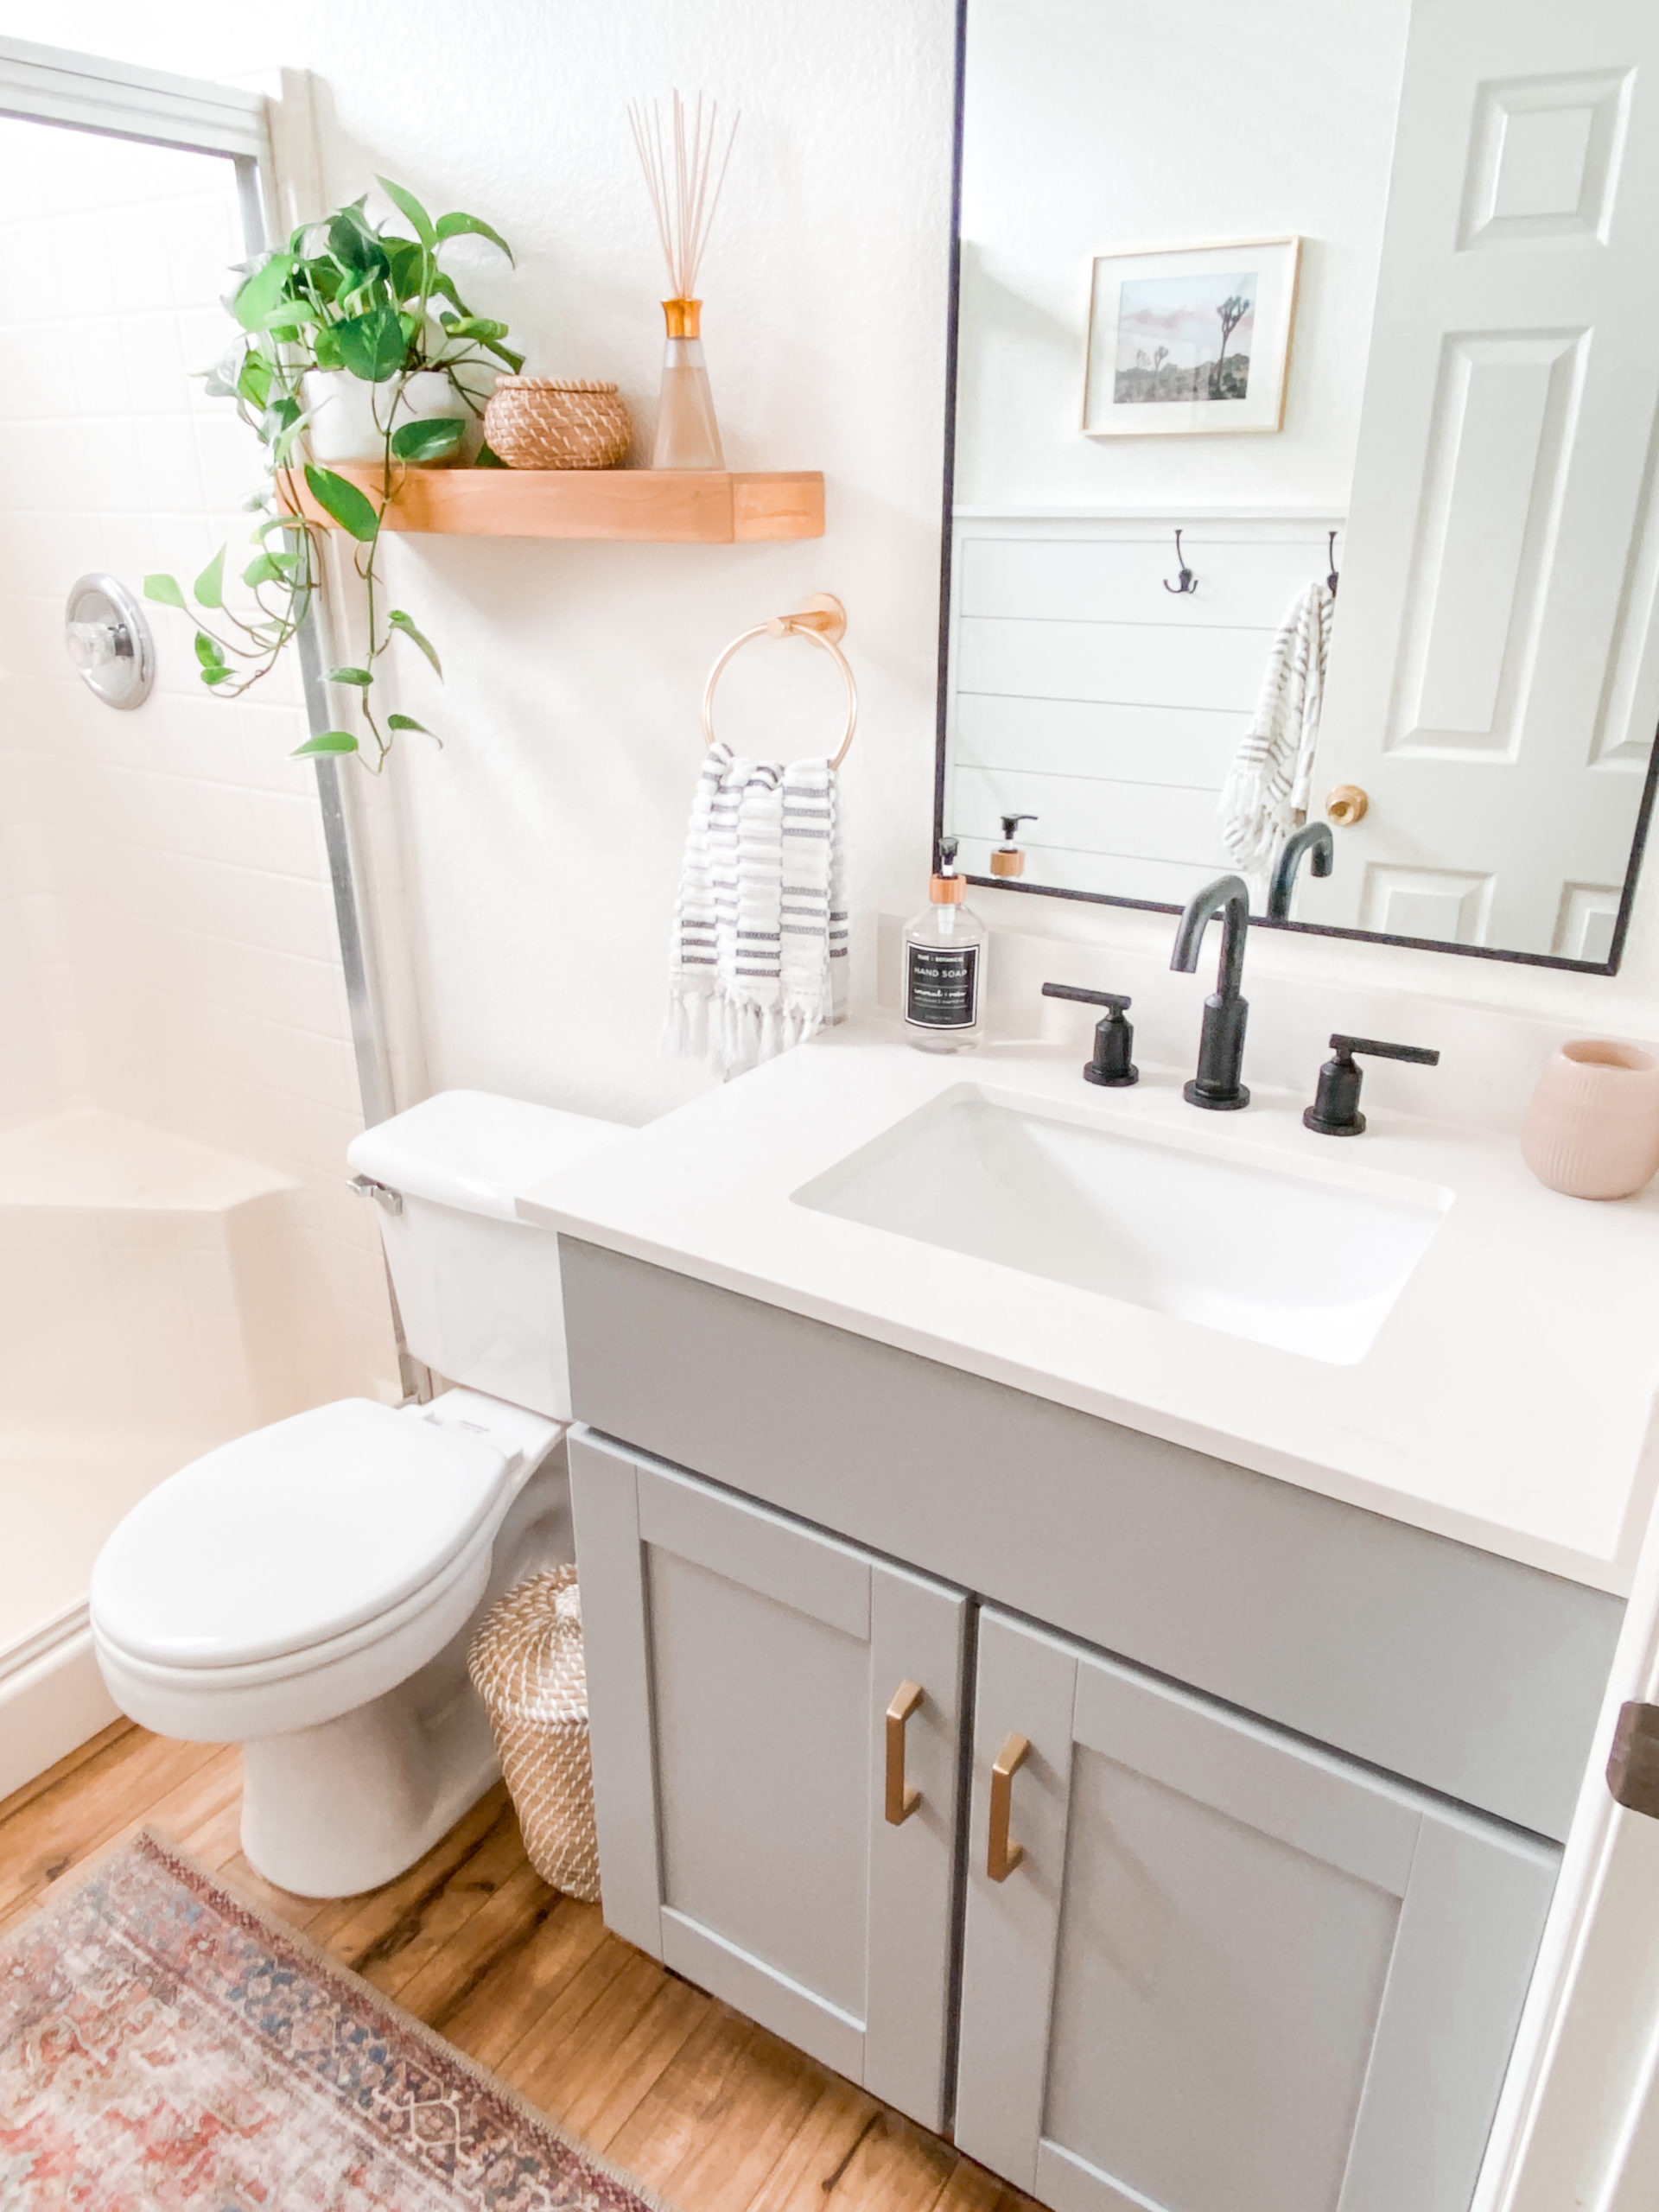 Small Bathroom Remodel Ideas: Befor and After | Domestic Blonde